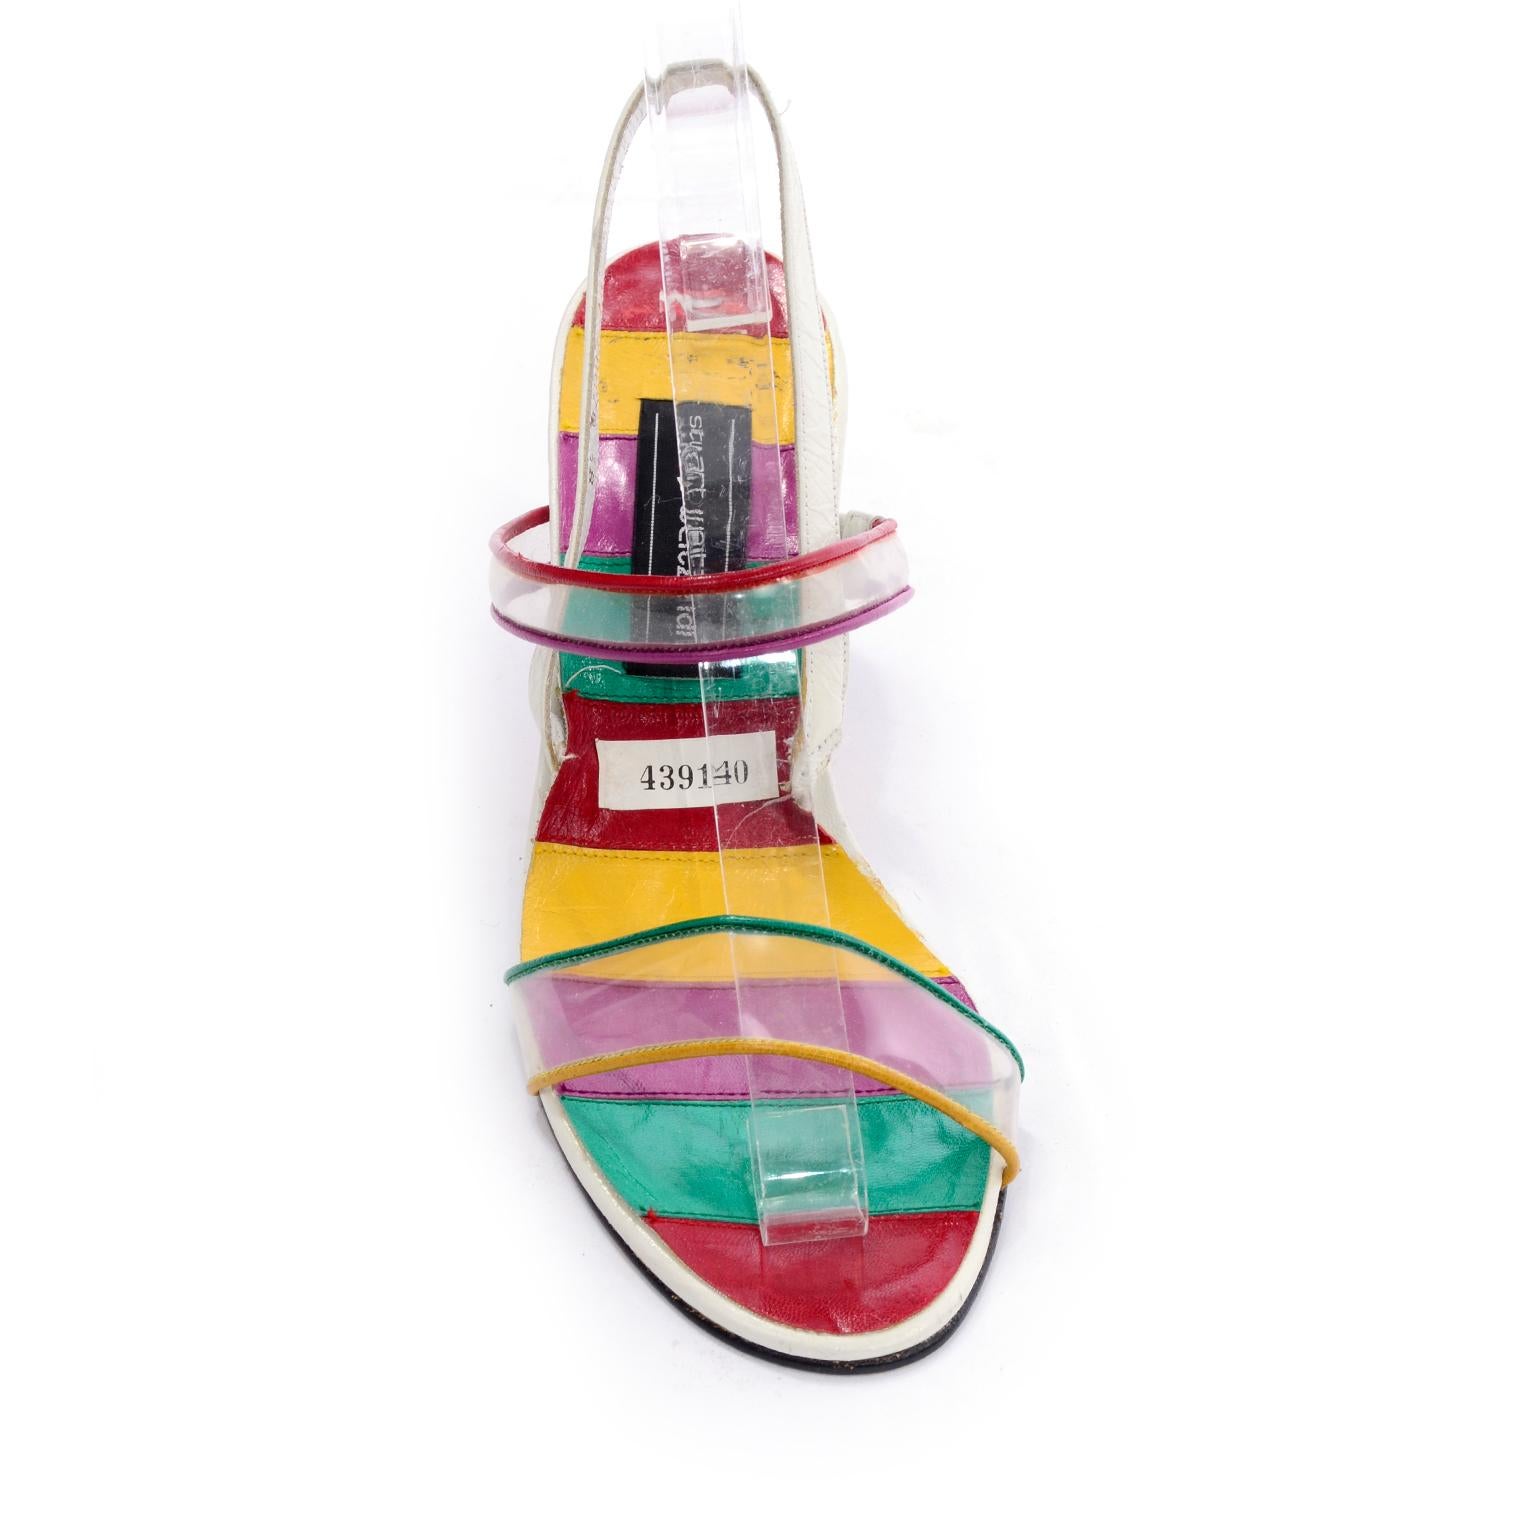 These vintage Stuart Weitzman rainbow sole heeled sandals are to die for! These fantastic vintage shoes have a diamond shaped hole in the wege heels, plastic straps and white slingback straps. The colors include shades of purple, green, red and